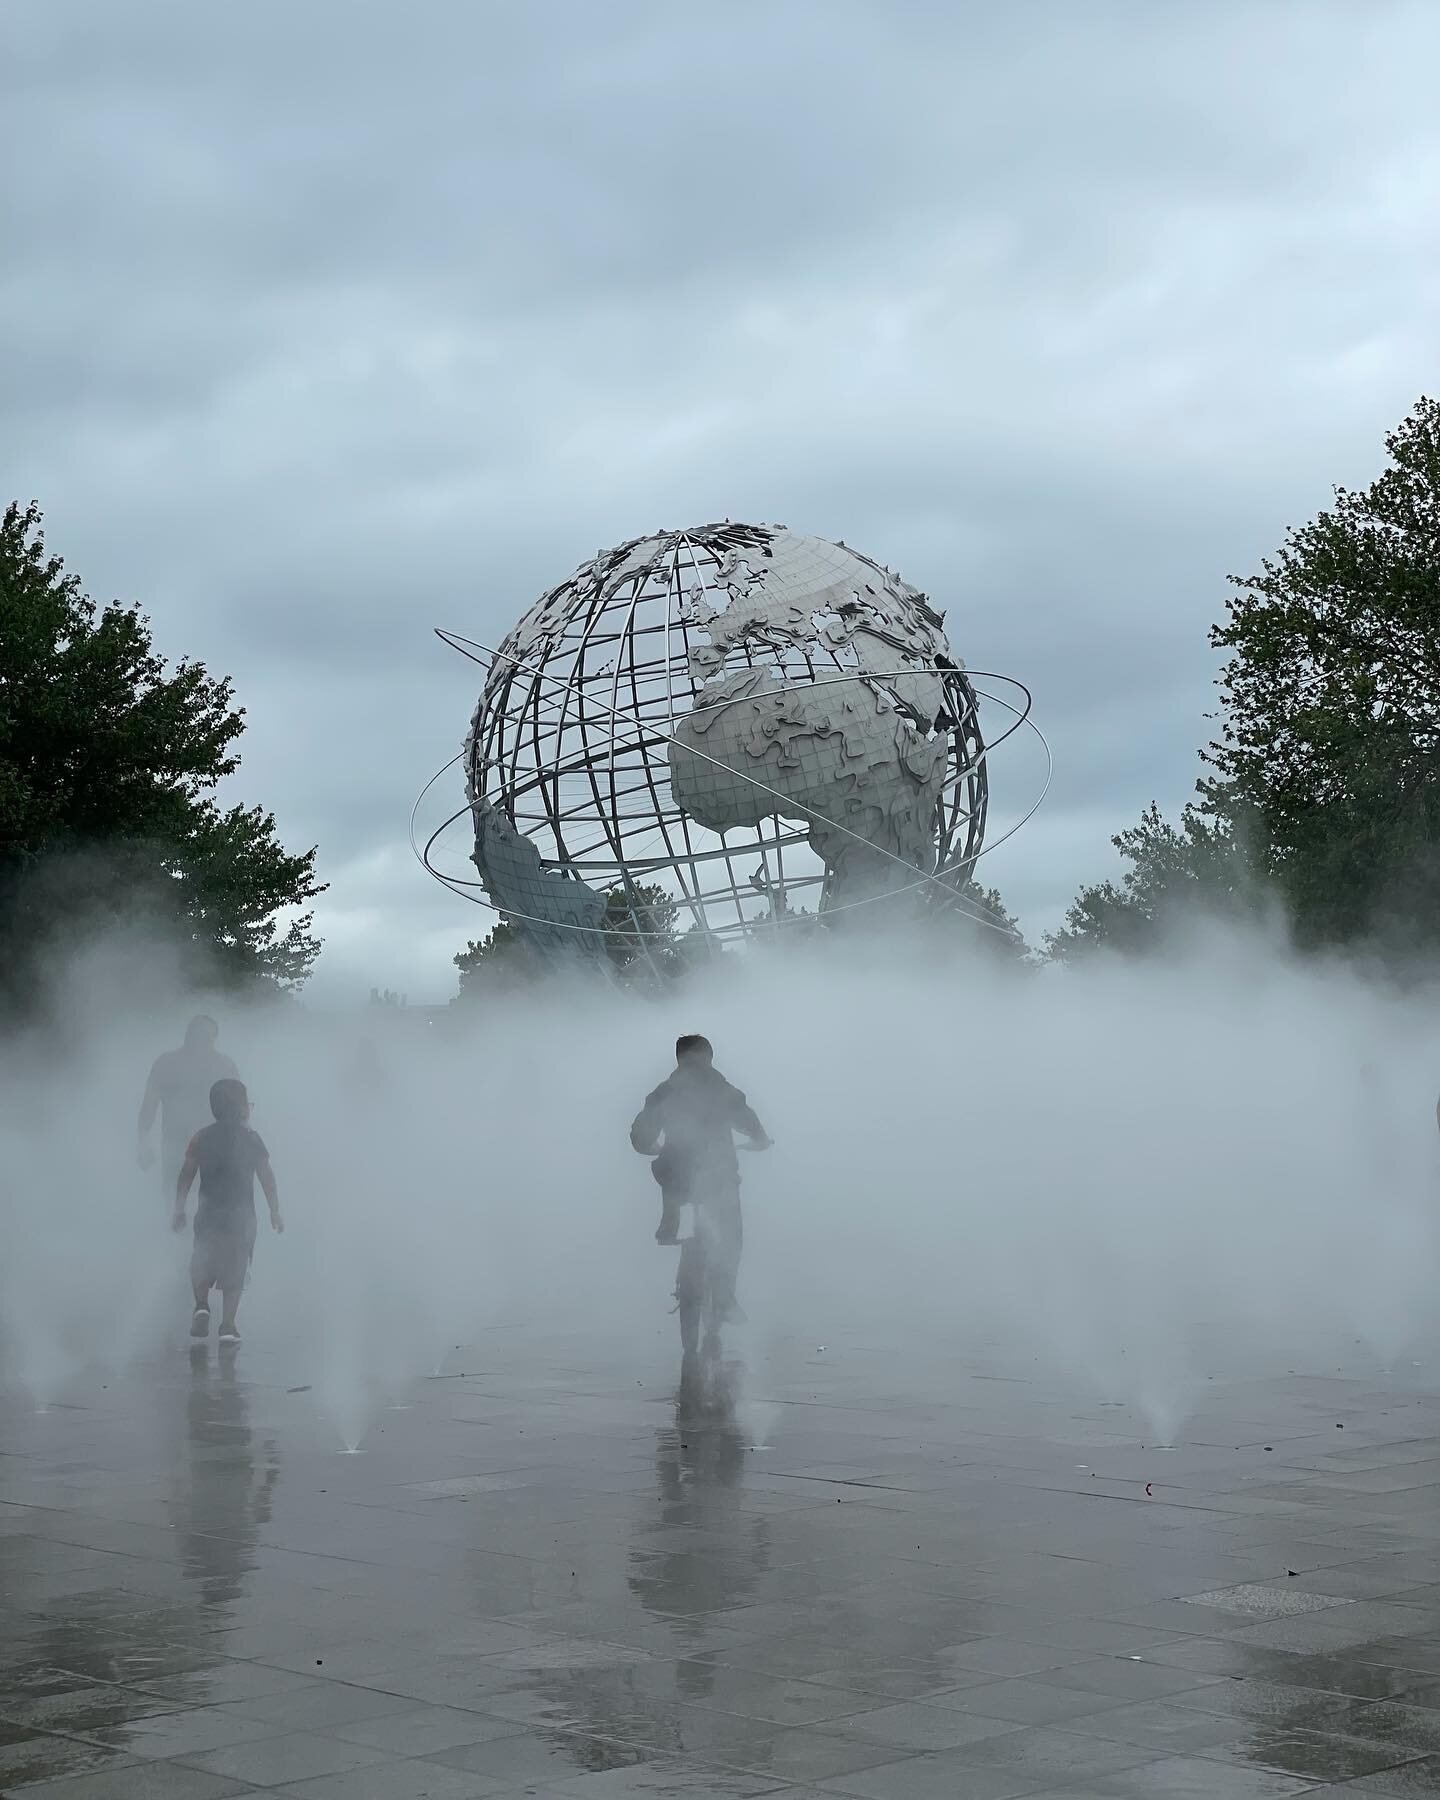 Finally made it to the Unisphere! This is one of the few remaining structures of the 1964 New York World&rsquo;s Fair - out in Flushings.
Need to go back to the park and spend more time exploring the rest.
.
.
.
#worldsfairs #newyorkworldsfair #world